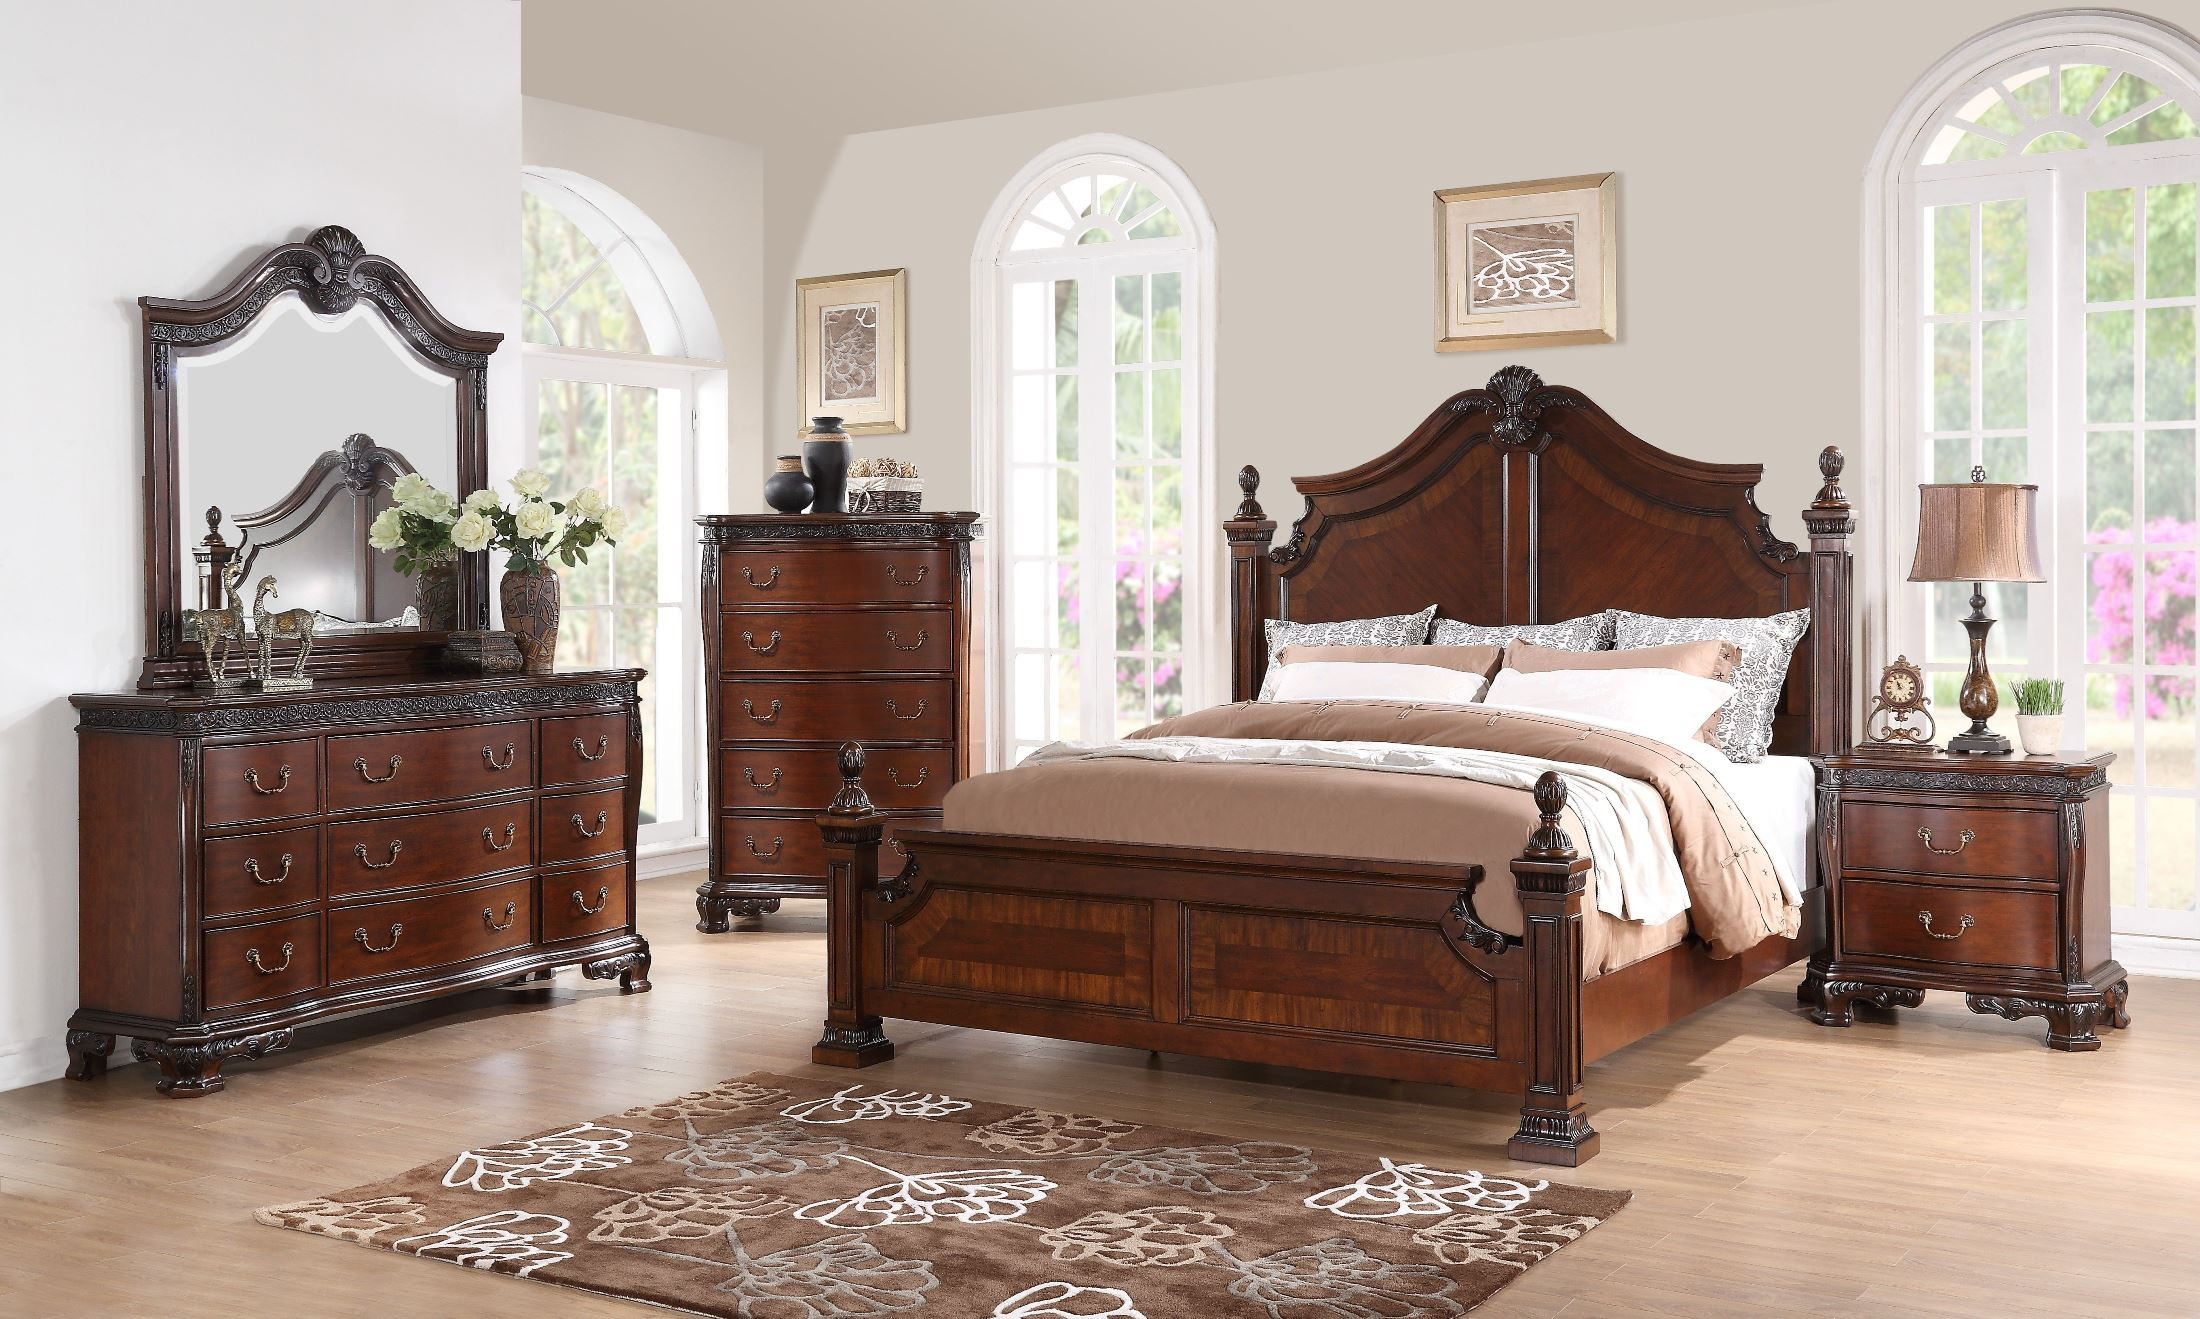 Mahogany Bedroom Furniture Set Devine Interiors Throughout Proportions 2200 X 1319 